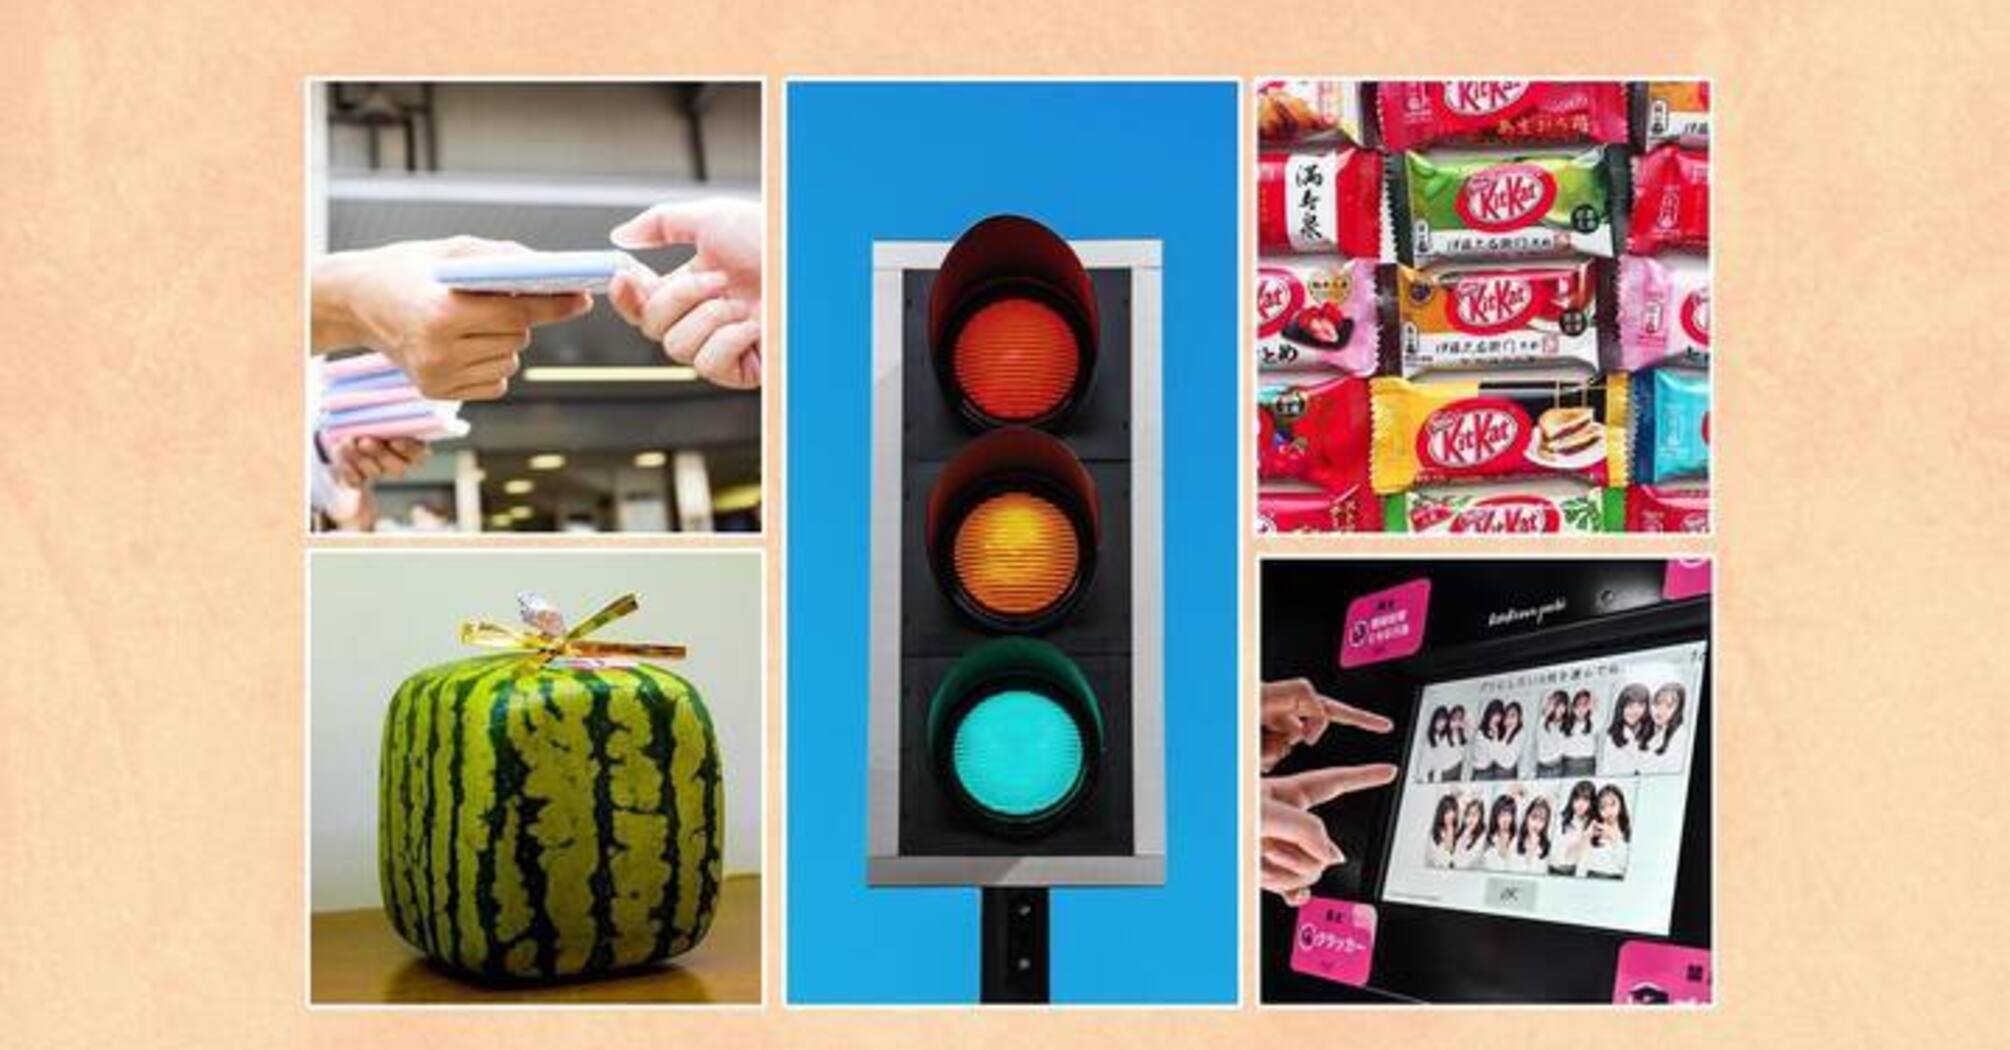 Square watermelons and smart toilets: what wonders come from Japan